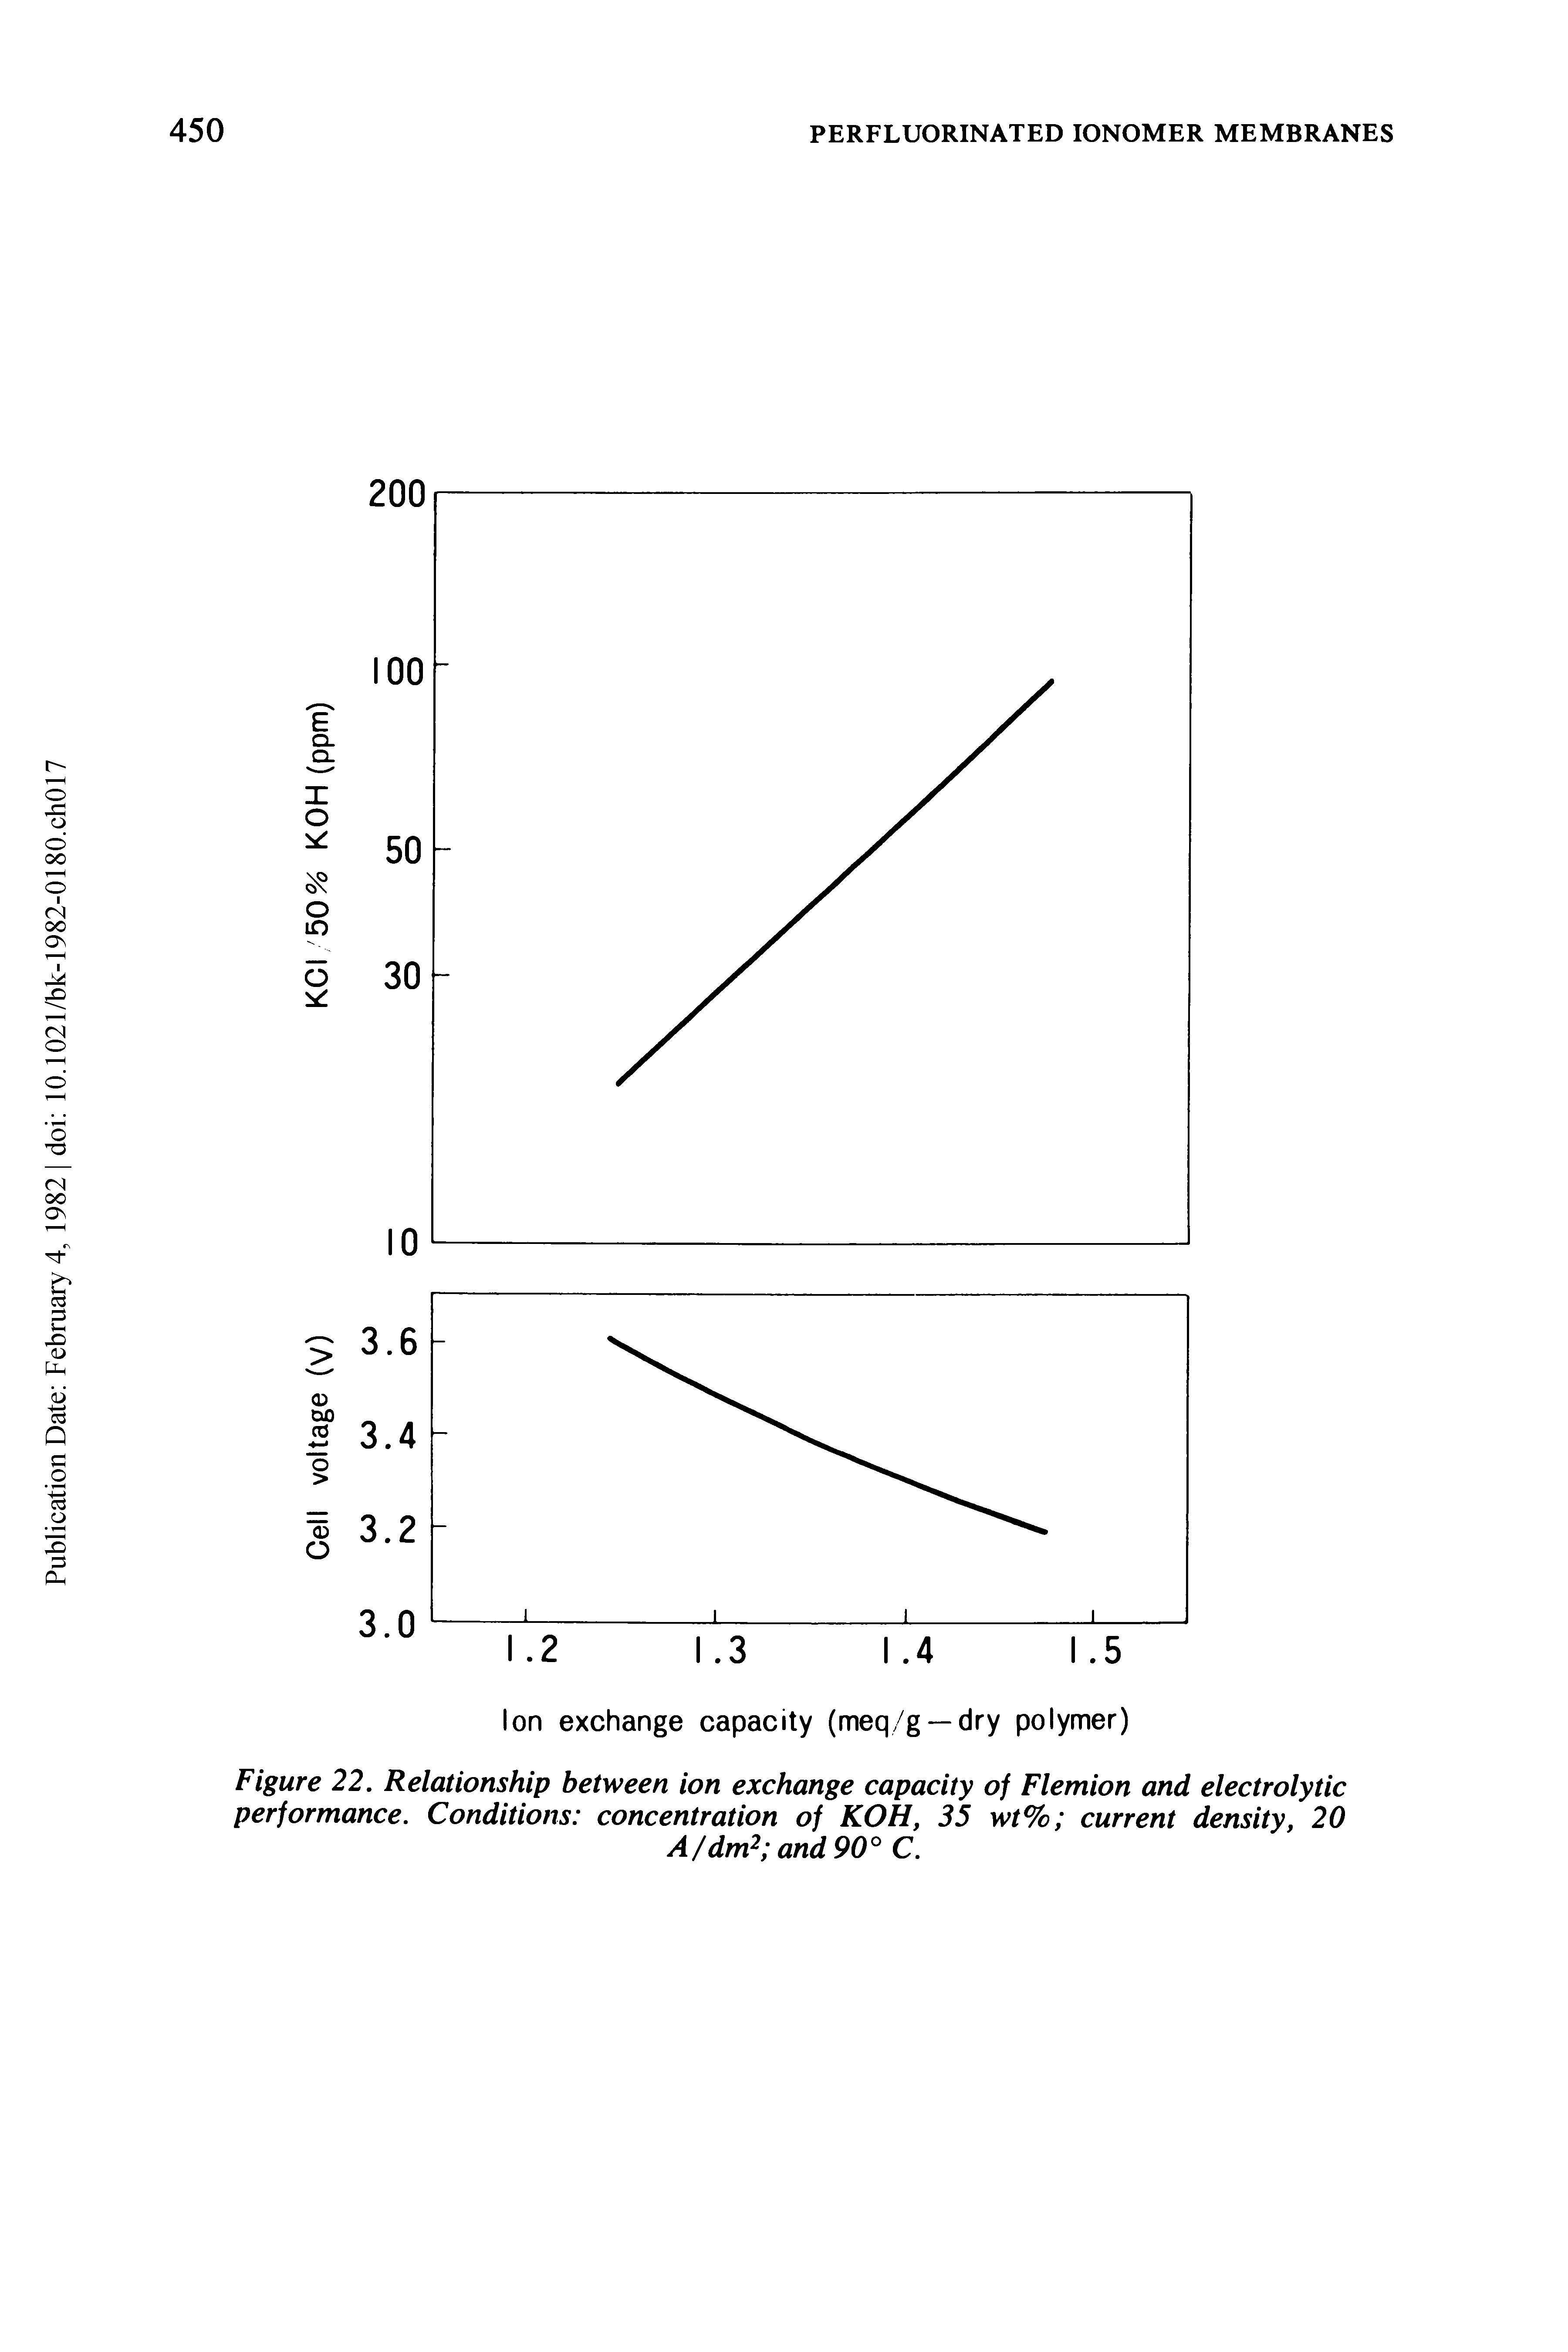 Figure 22. Relationship between ion exchange capacity of Flemion and electrolytic performance. Conditions concentration of KOH, 35 wt% current density, 20...